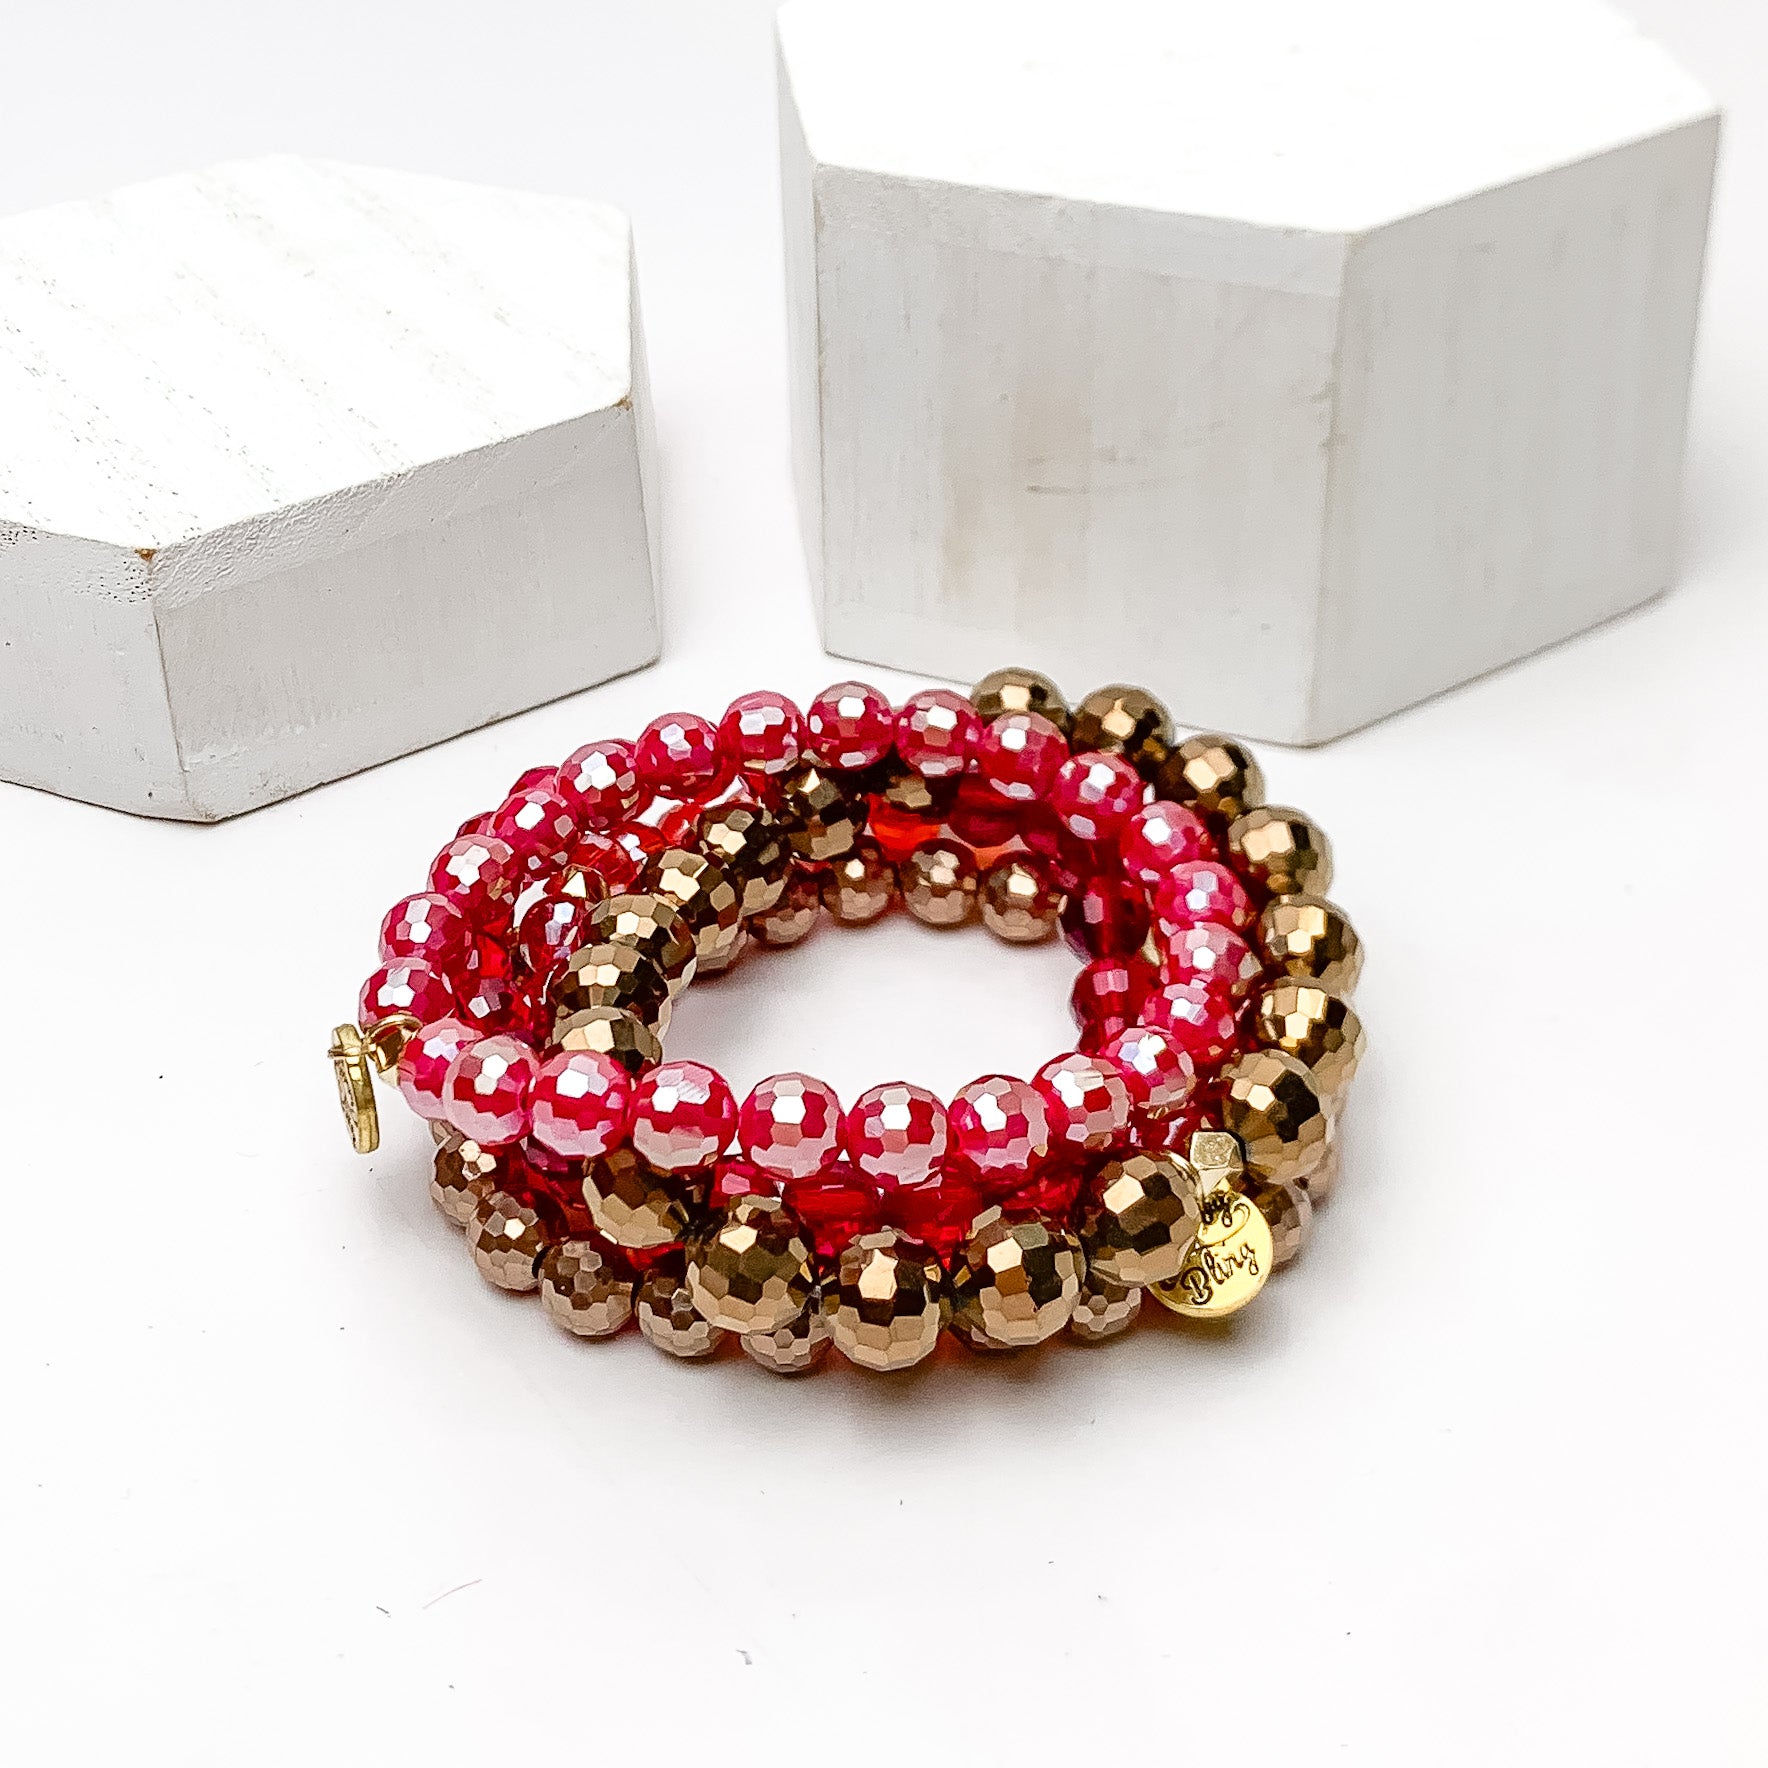 Set of Five | All Nighter Crystal Beaded Bracelet Set in Red and Gold Tones - Giddy Up Glamour Boutique